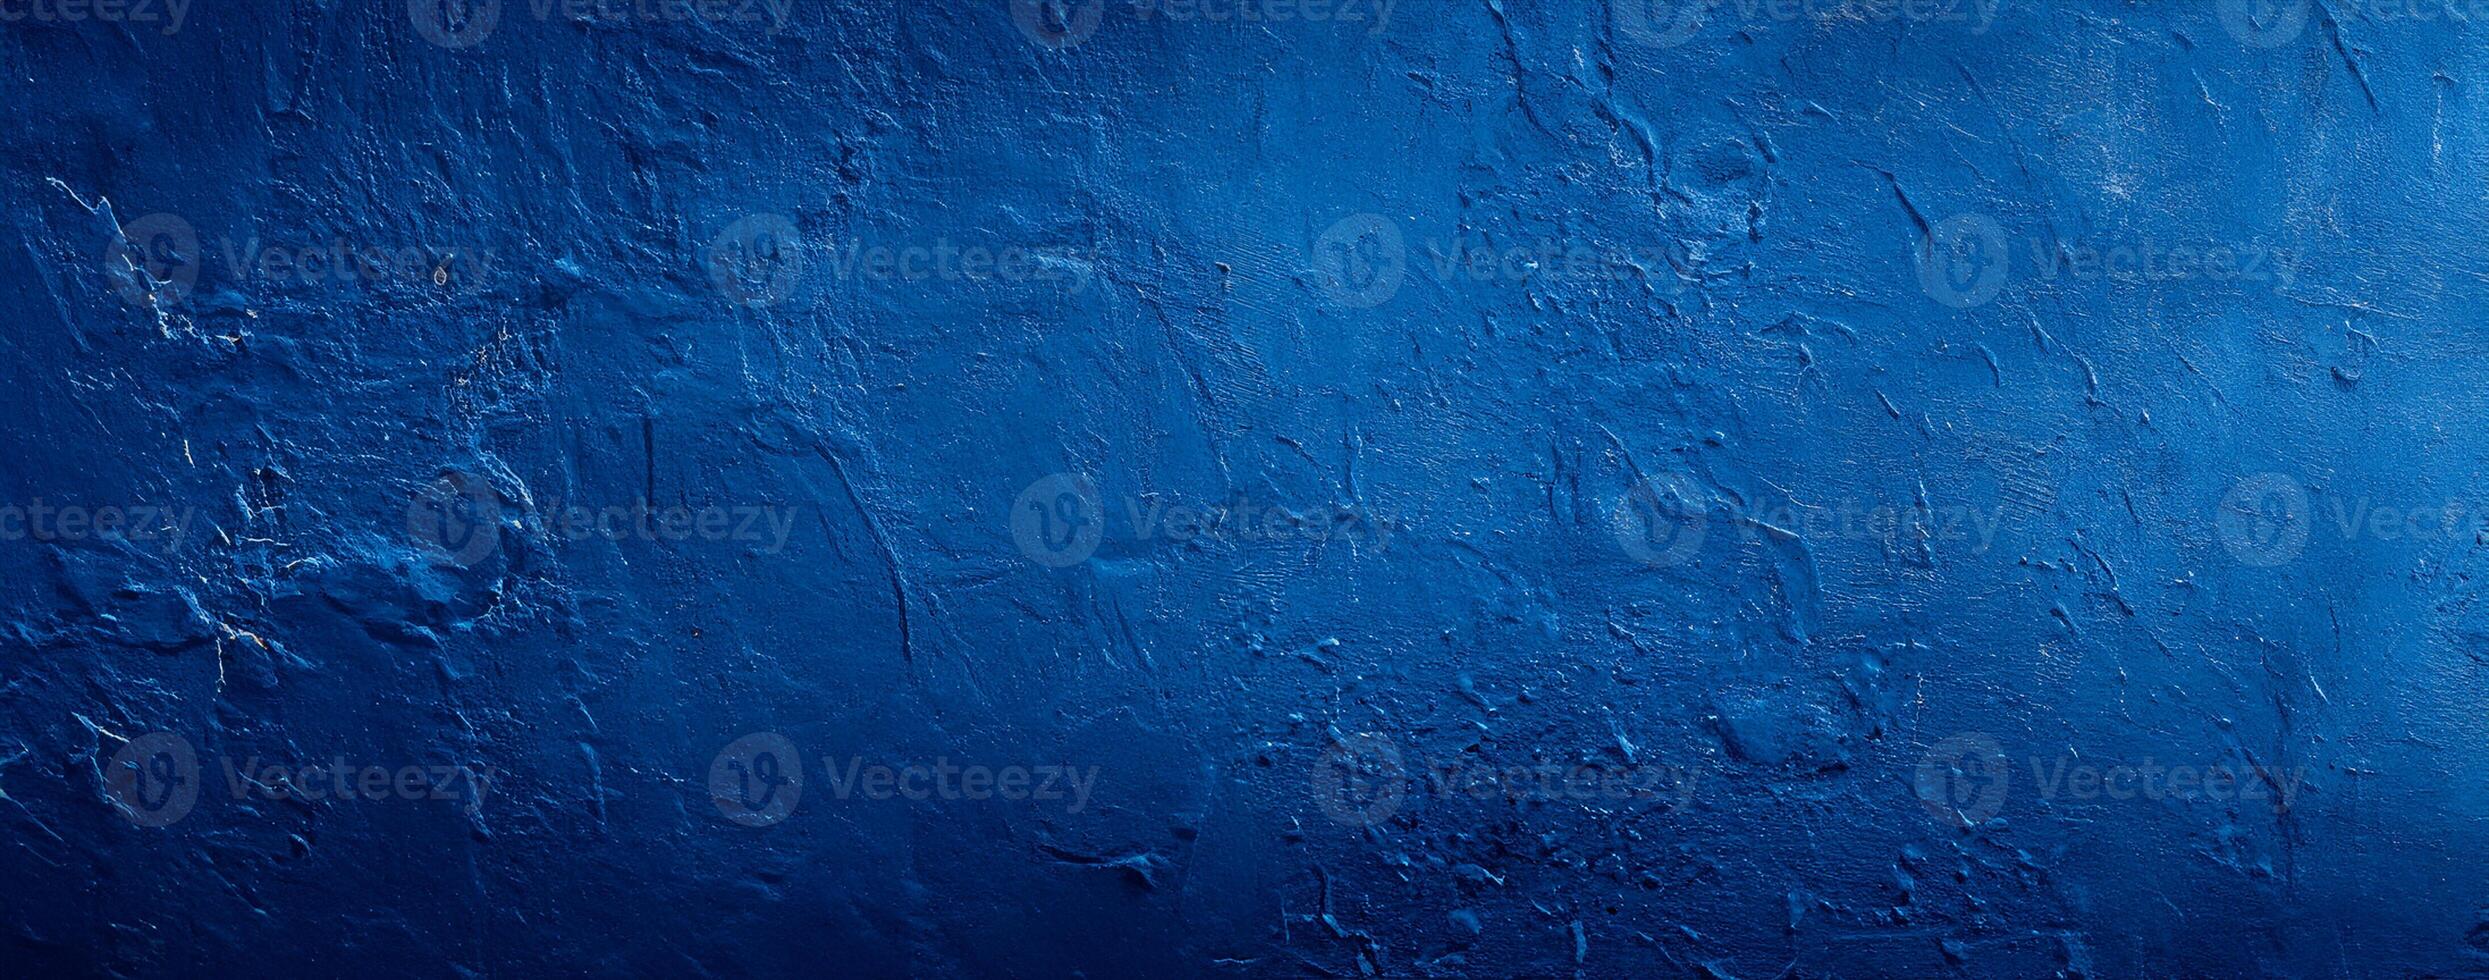 dark blue abstract cement concrete wall texture background photo